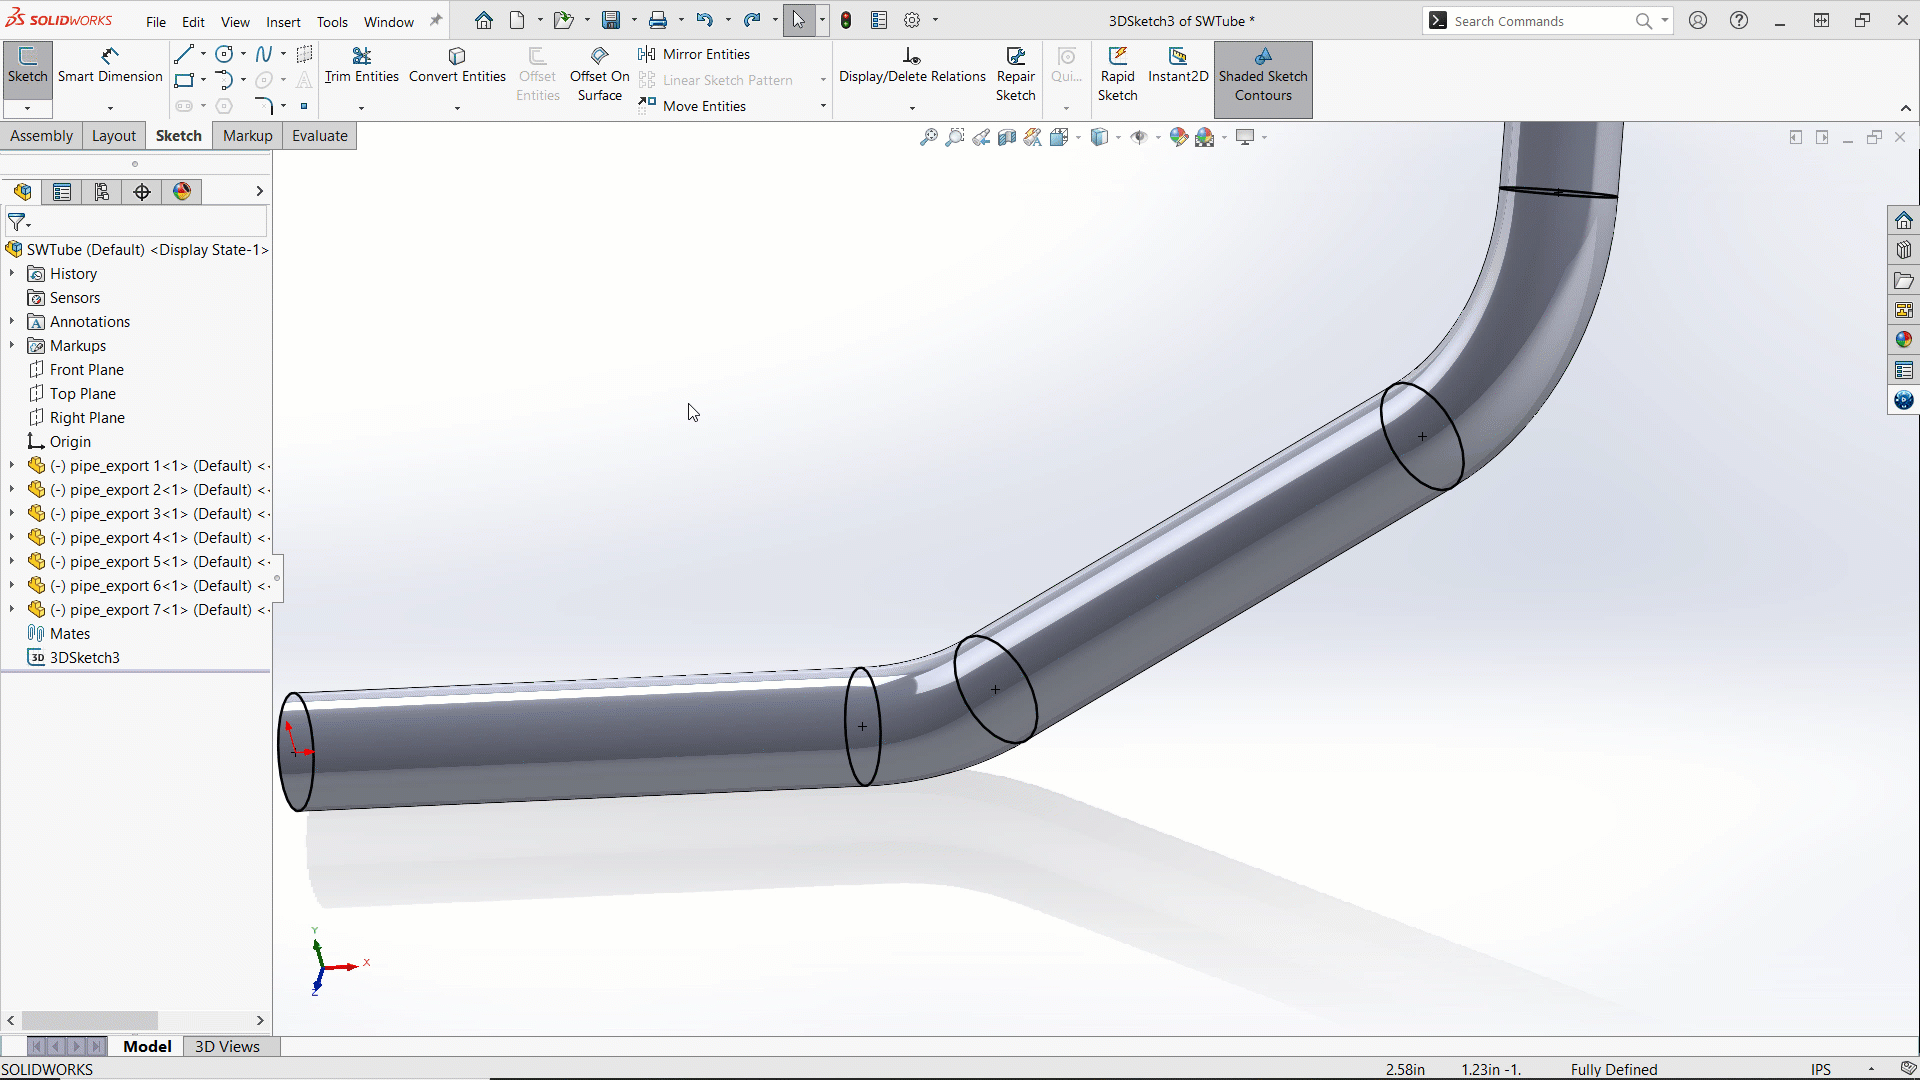 The measure command in SOLIDWORKS can measure both straight line and arc length.